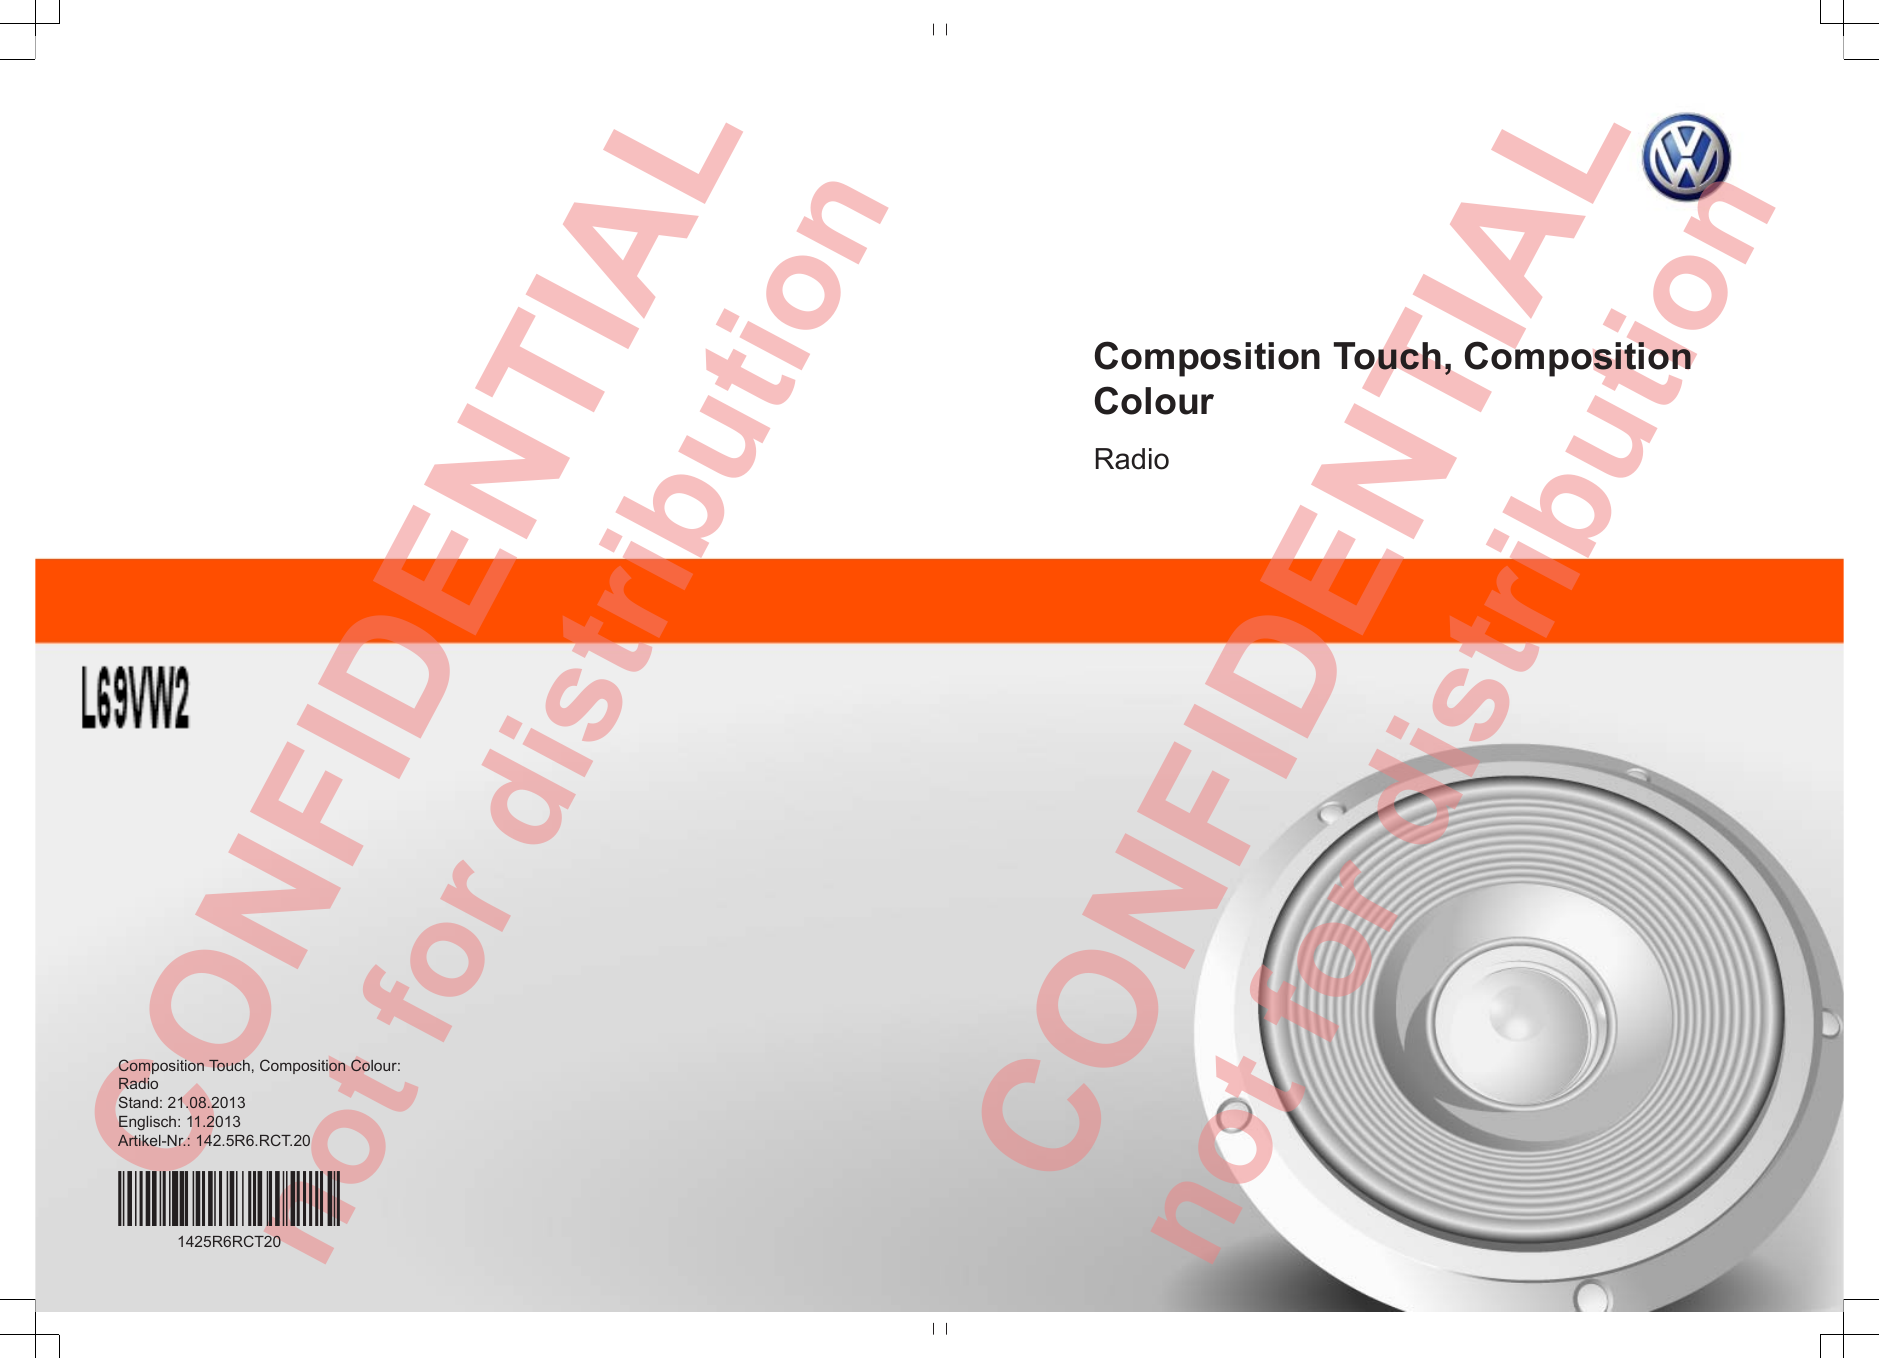  CONFIDENTIAL not for distribution  CONFIDENTIAL not for distribution Composition Touch, CompositionColourRadioComposition Touch, Composition Colour:RadioStand: 21.08.2013Englisch: 11.2013Artikel-Nr.: 142.5R6.RCT.201425R6RCT20